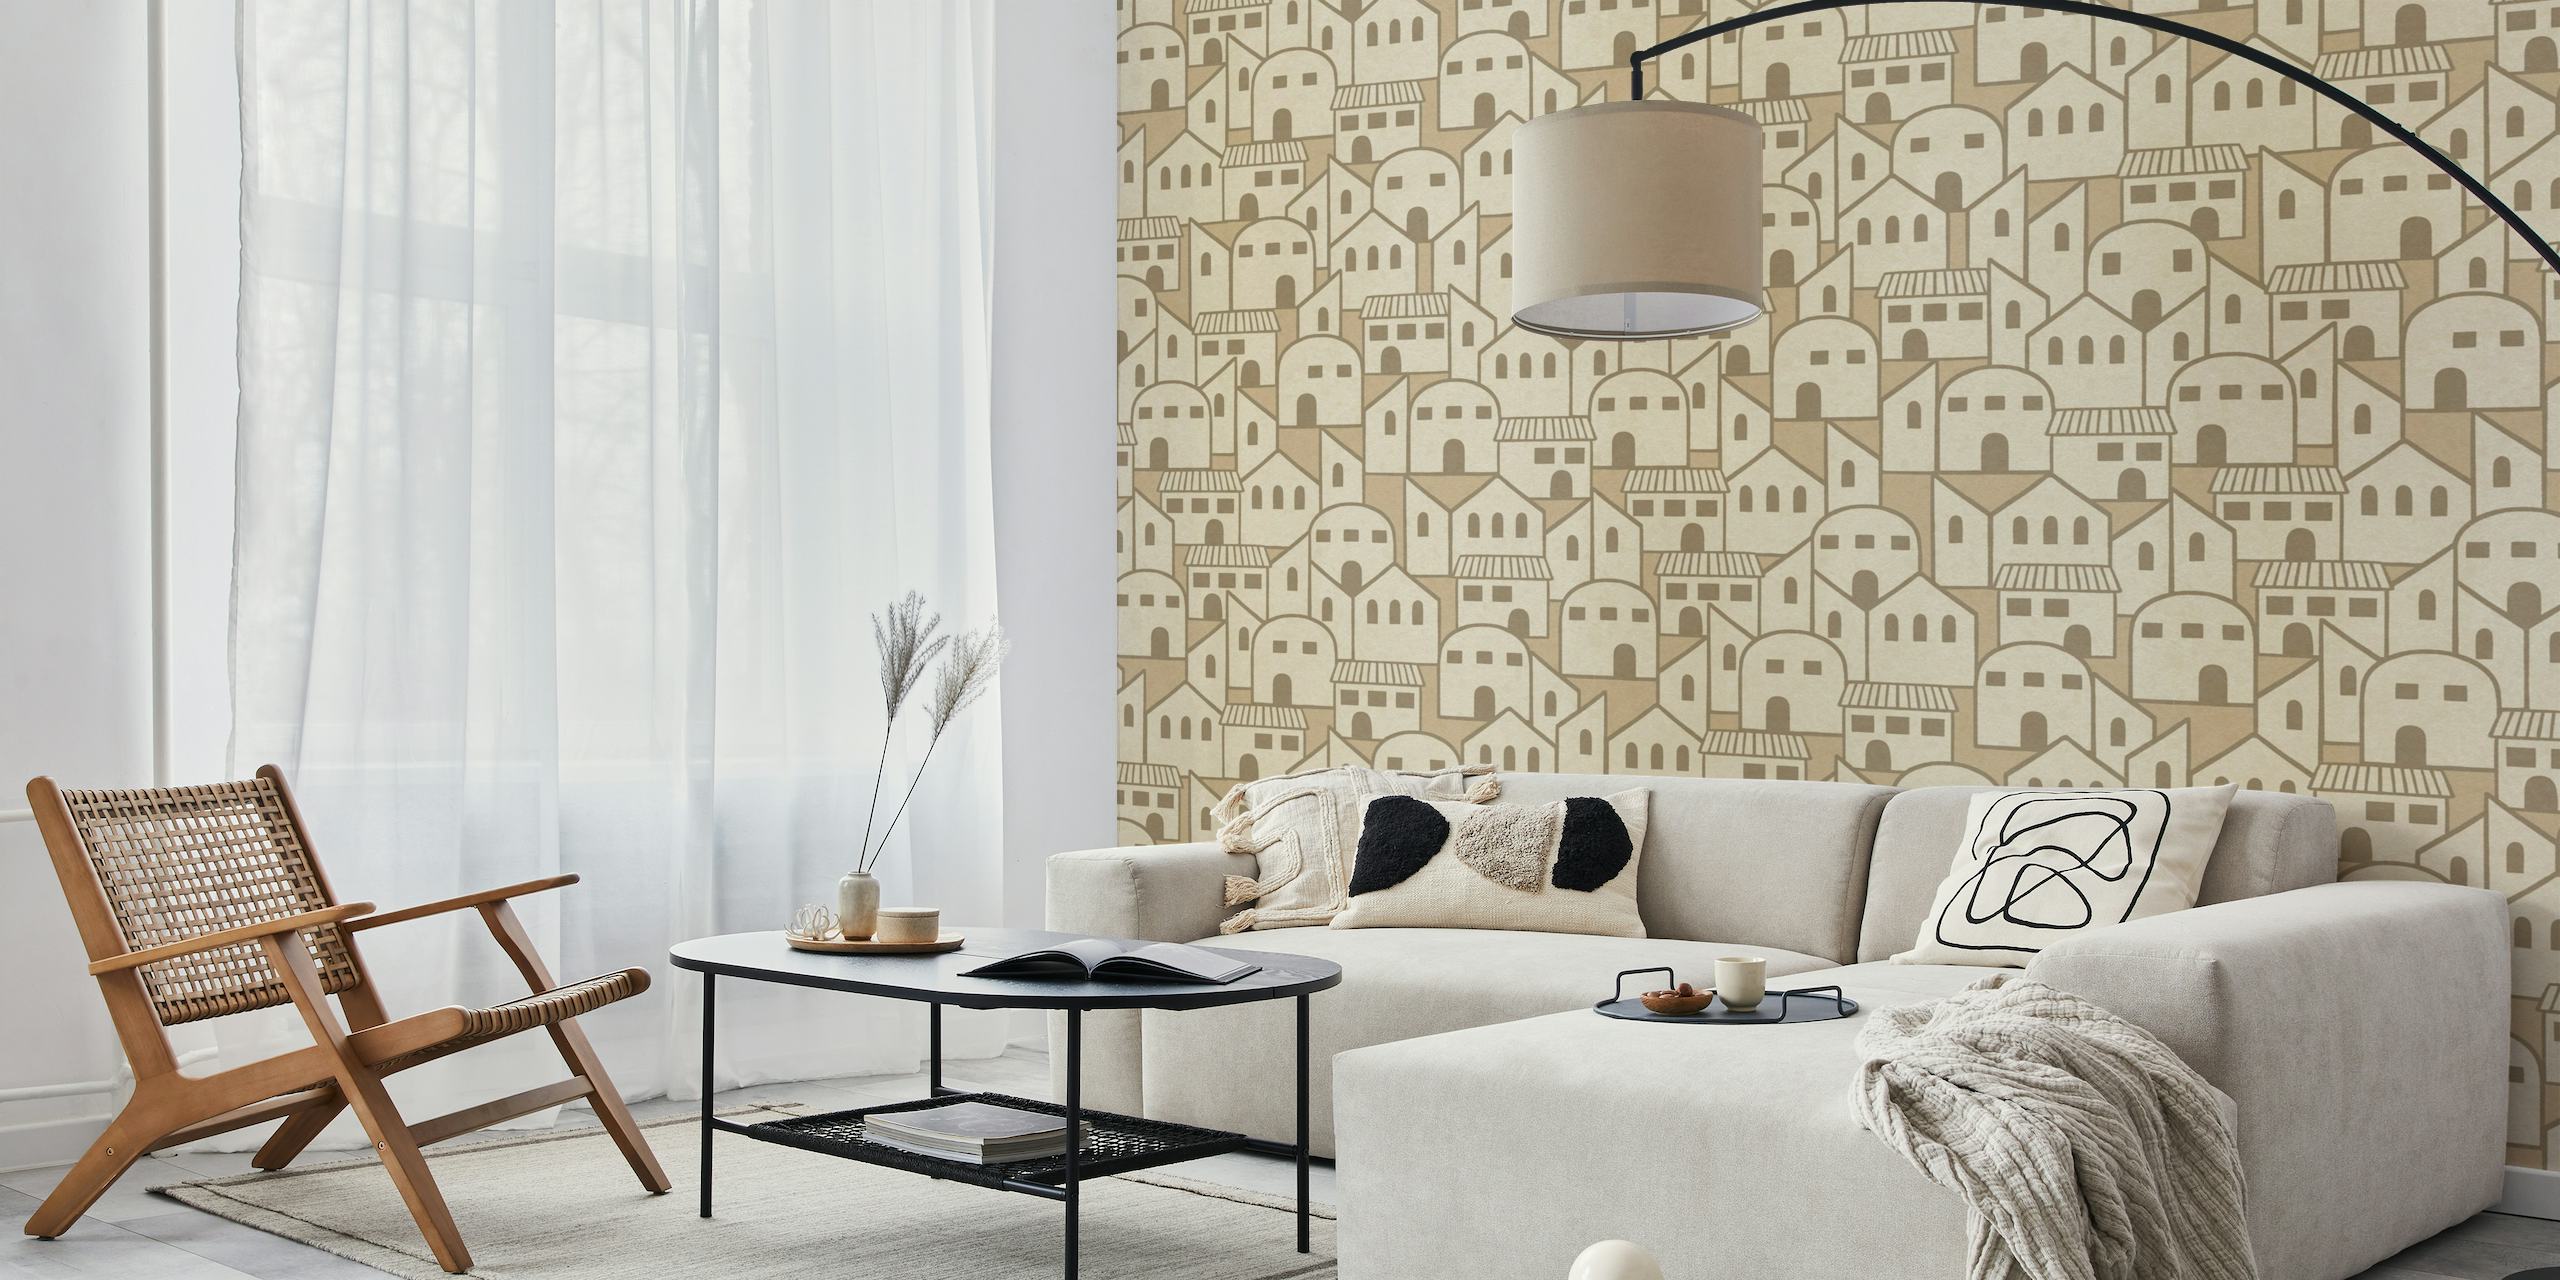 Minimalist abstract houses pattern in tan and beige colors for a wall mural